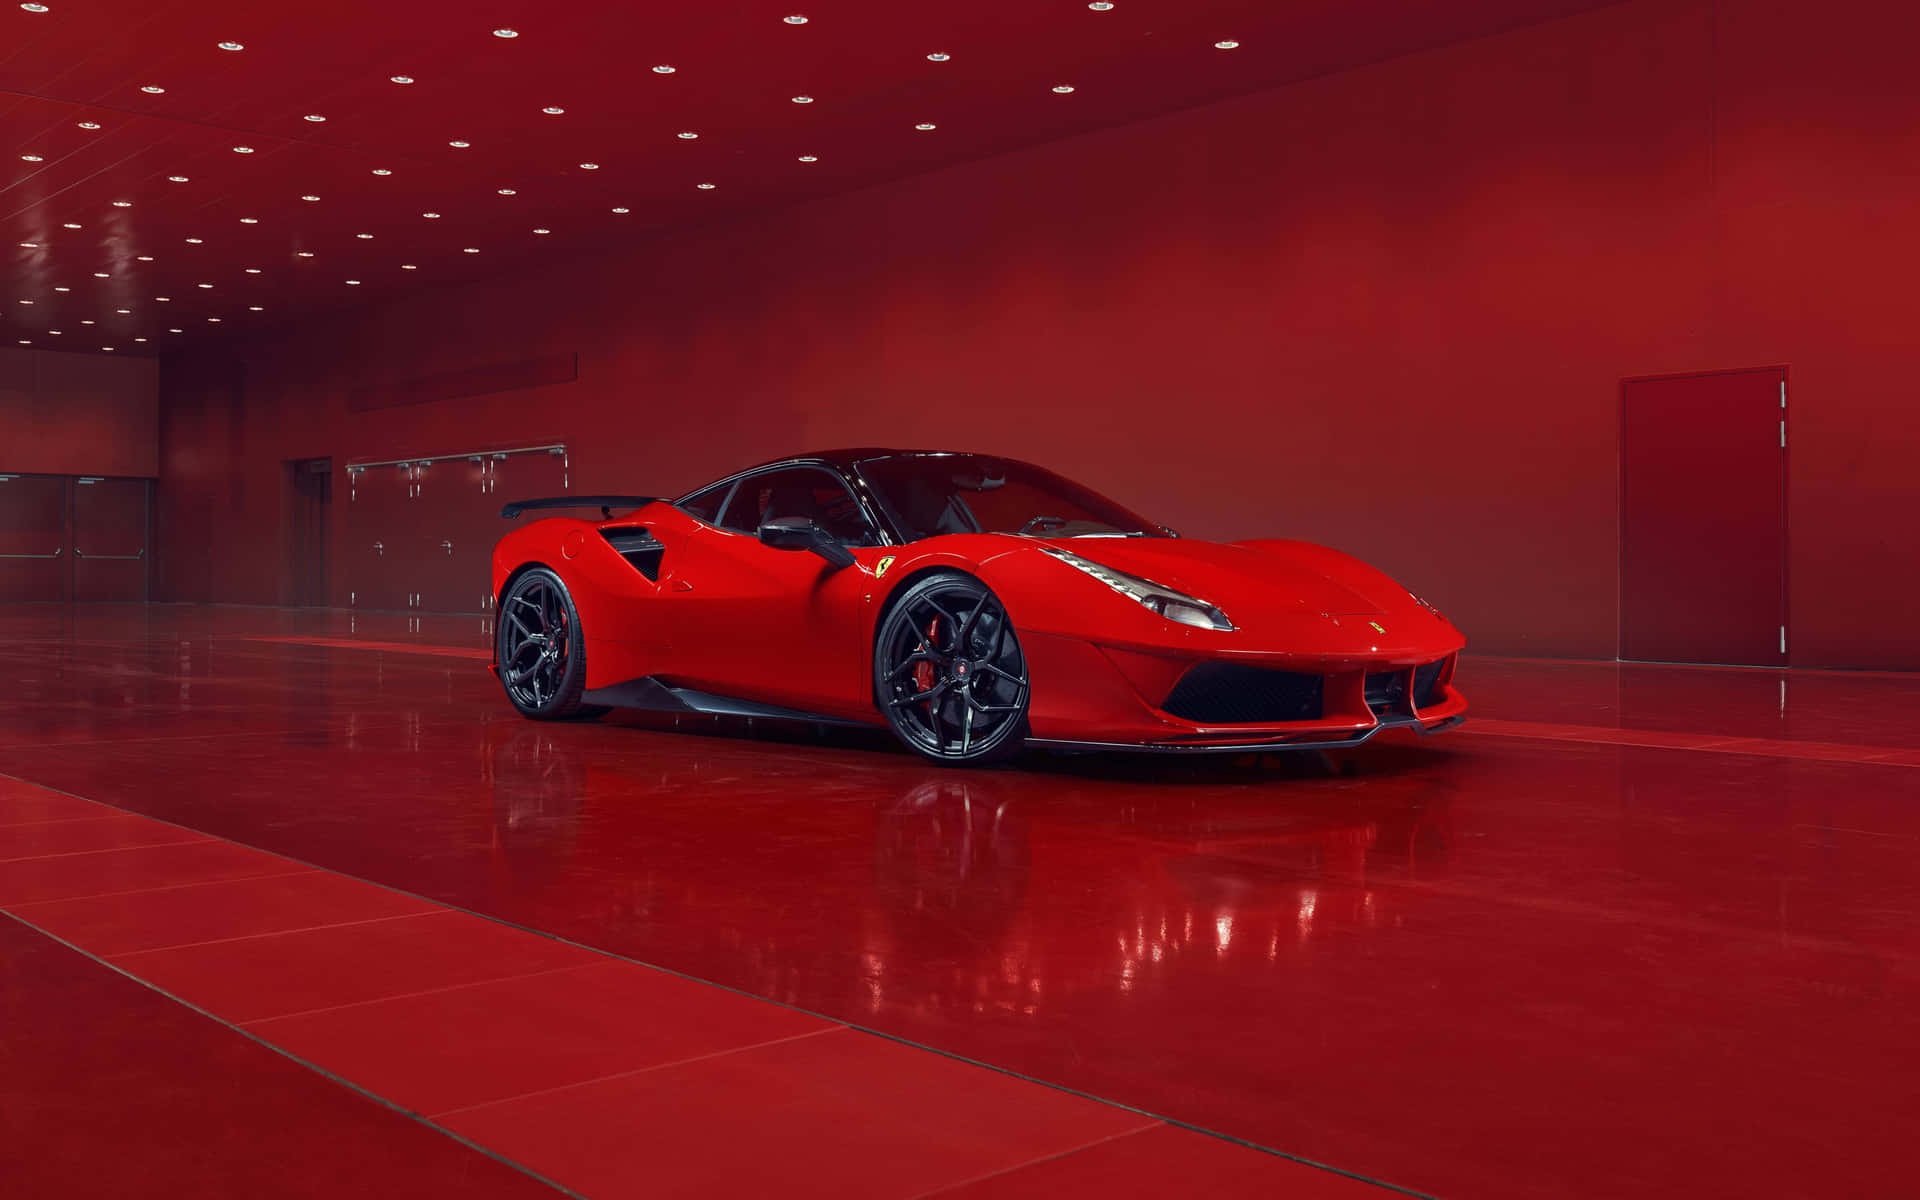 Rev up your engines with a sleek 4K Ferrari